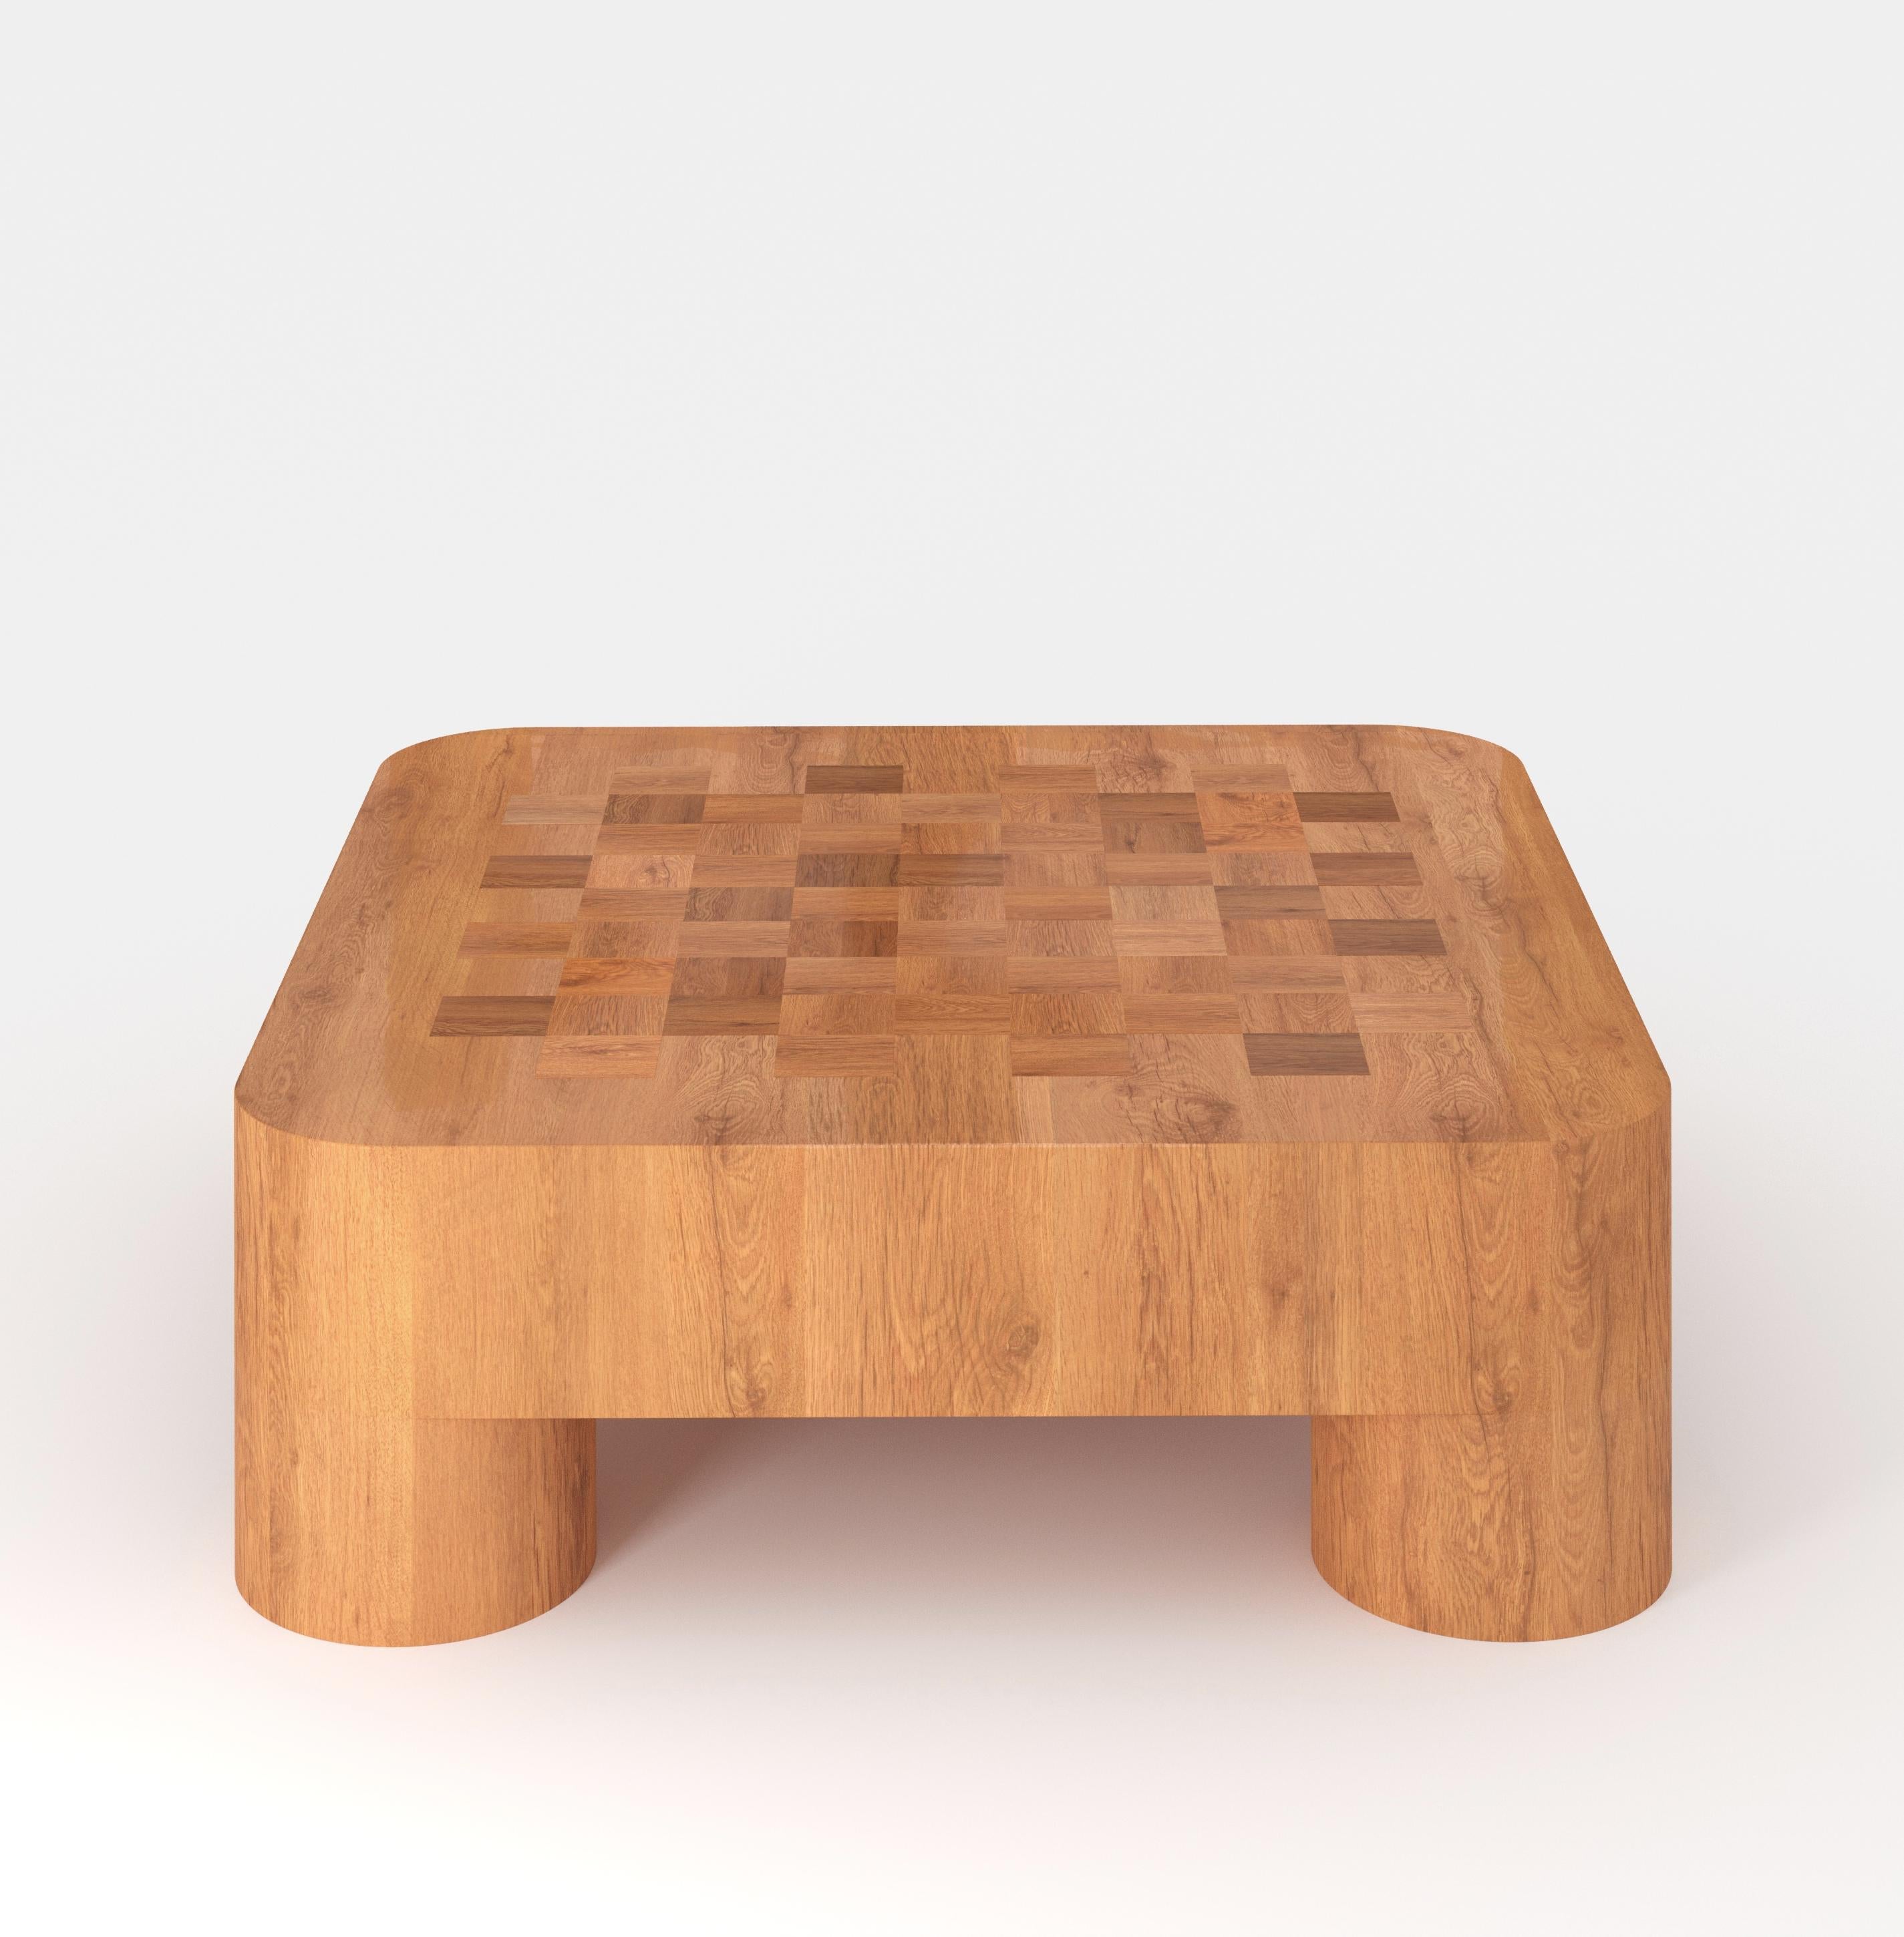 A chunky coffee table that looks as solid as the solid Oak wood it's made of, but with a delicate Marquetry top in reclaimed Oak from Chianti wine barrels. 

Sizes and materials are fully customizable.

About Fred&Juul:

Fred&Juul renew traditions